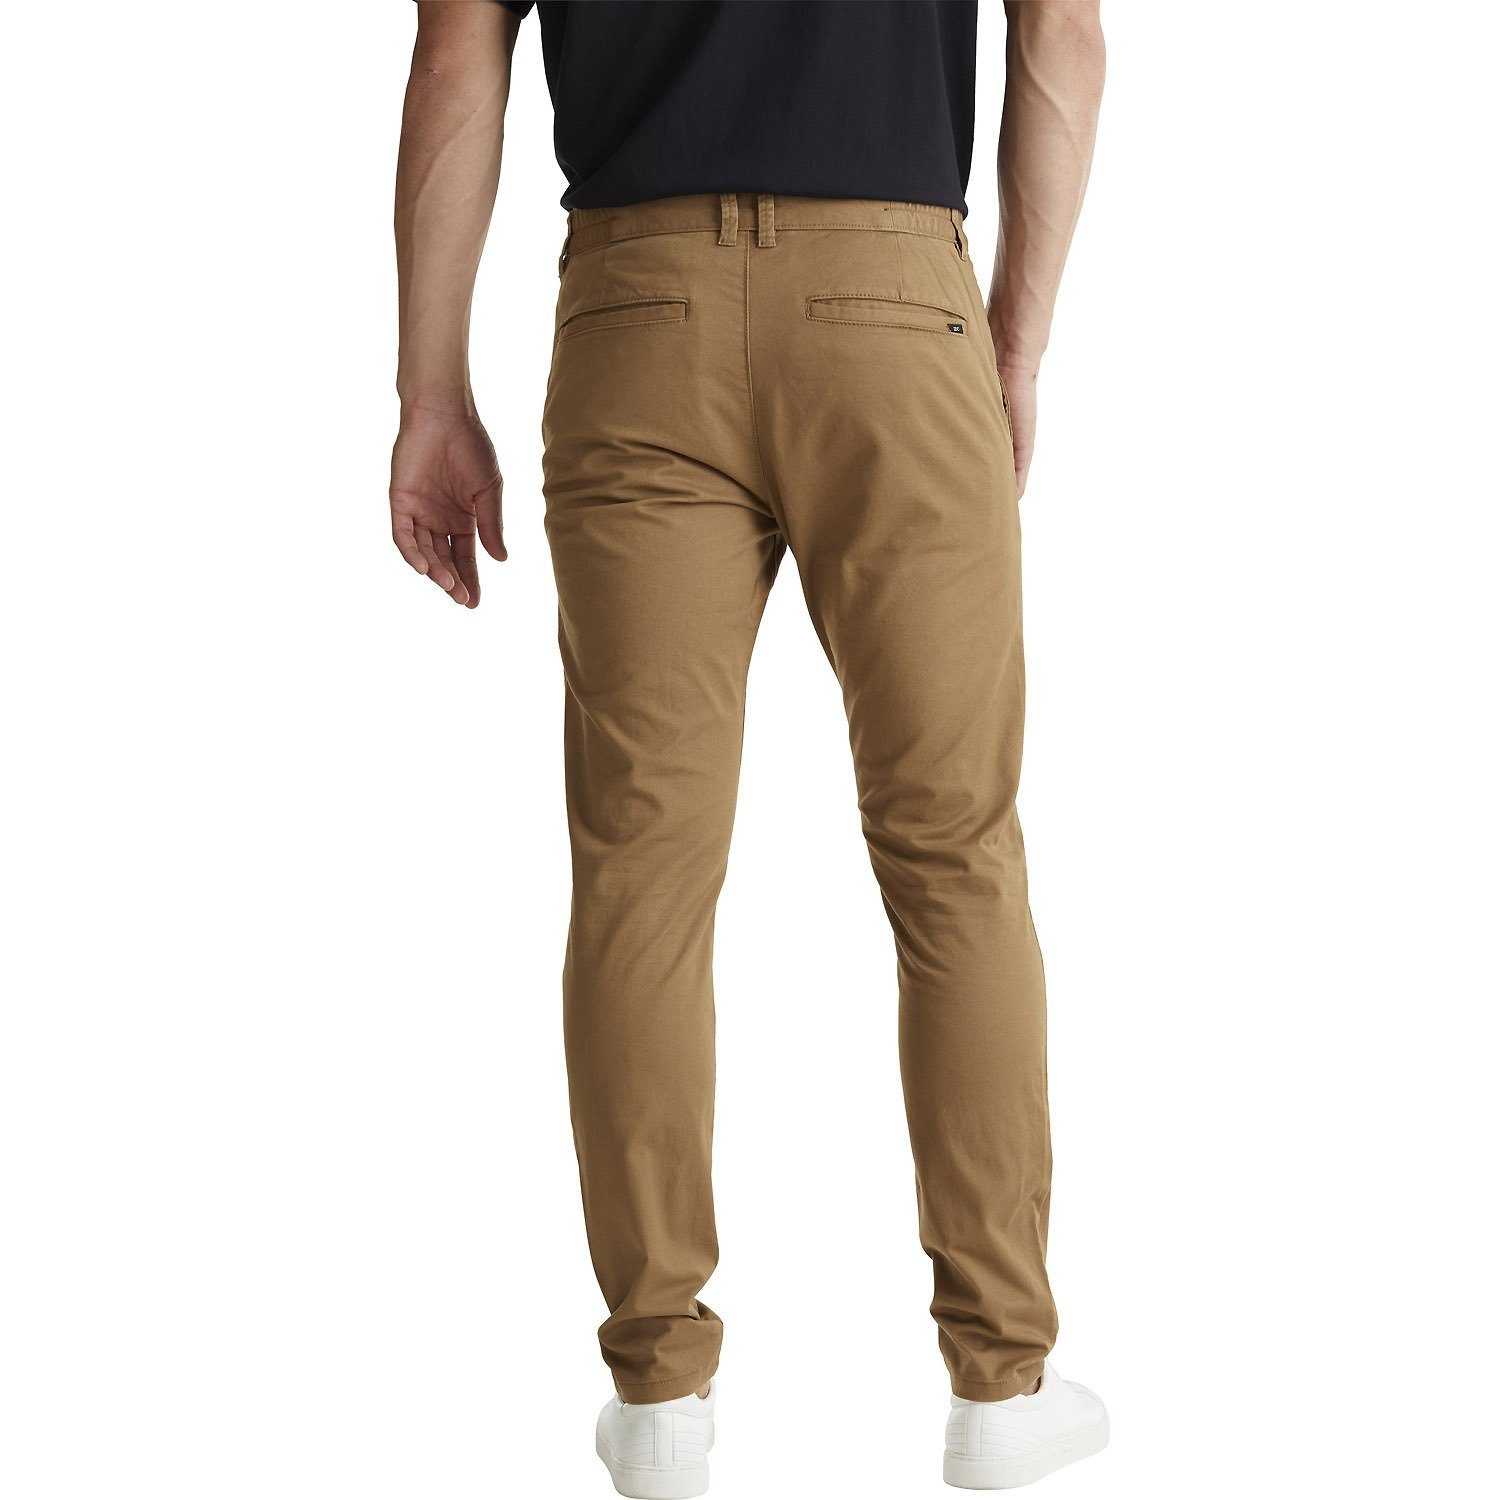 Esprit Chinostyle edc Outdoorhose Hose by